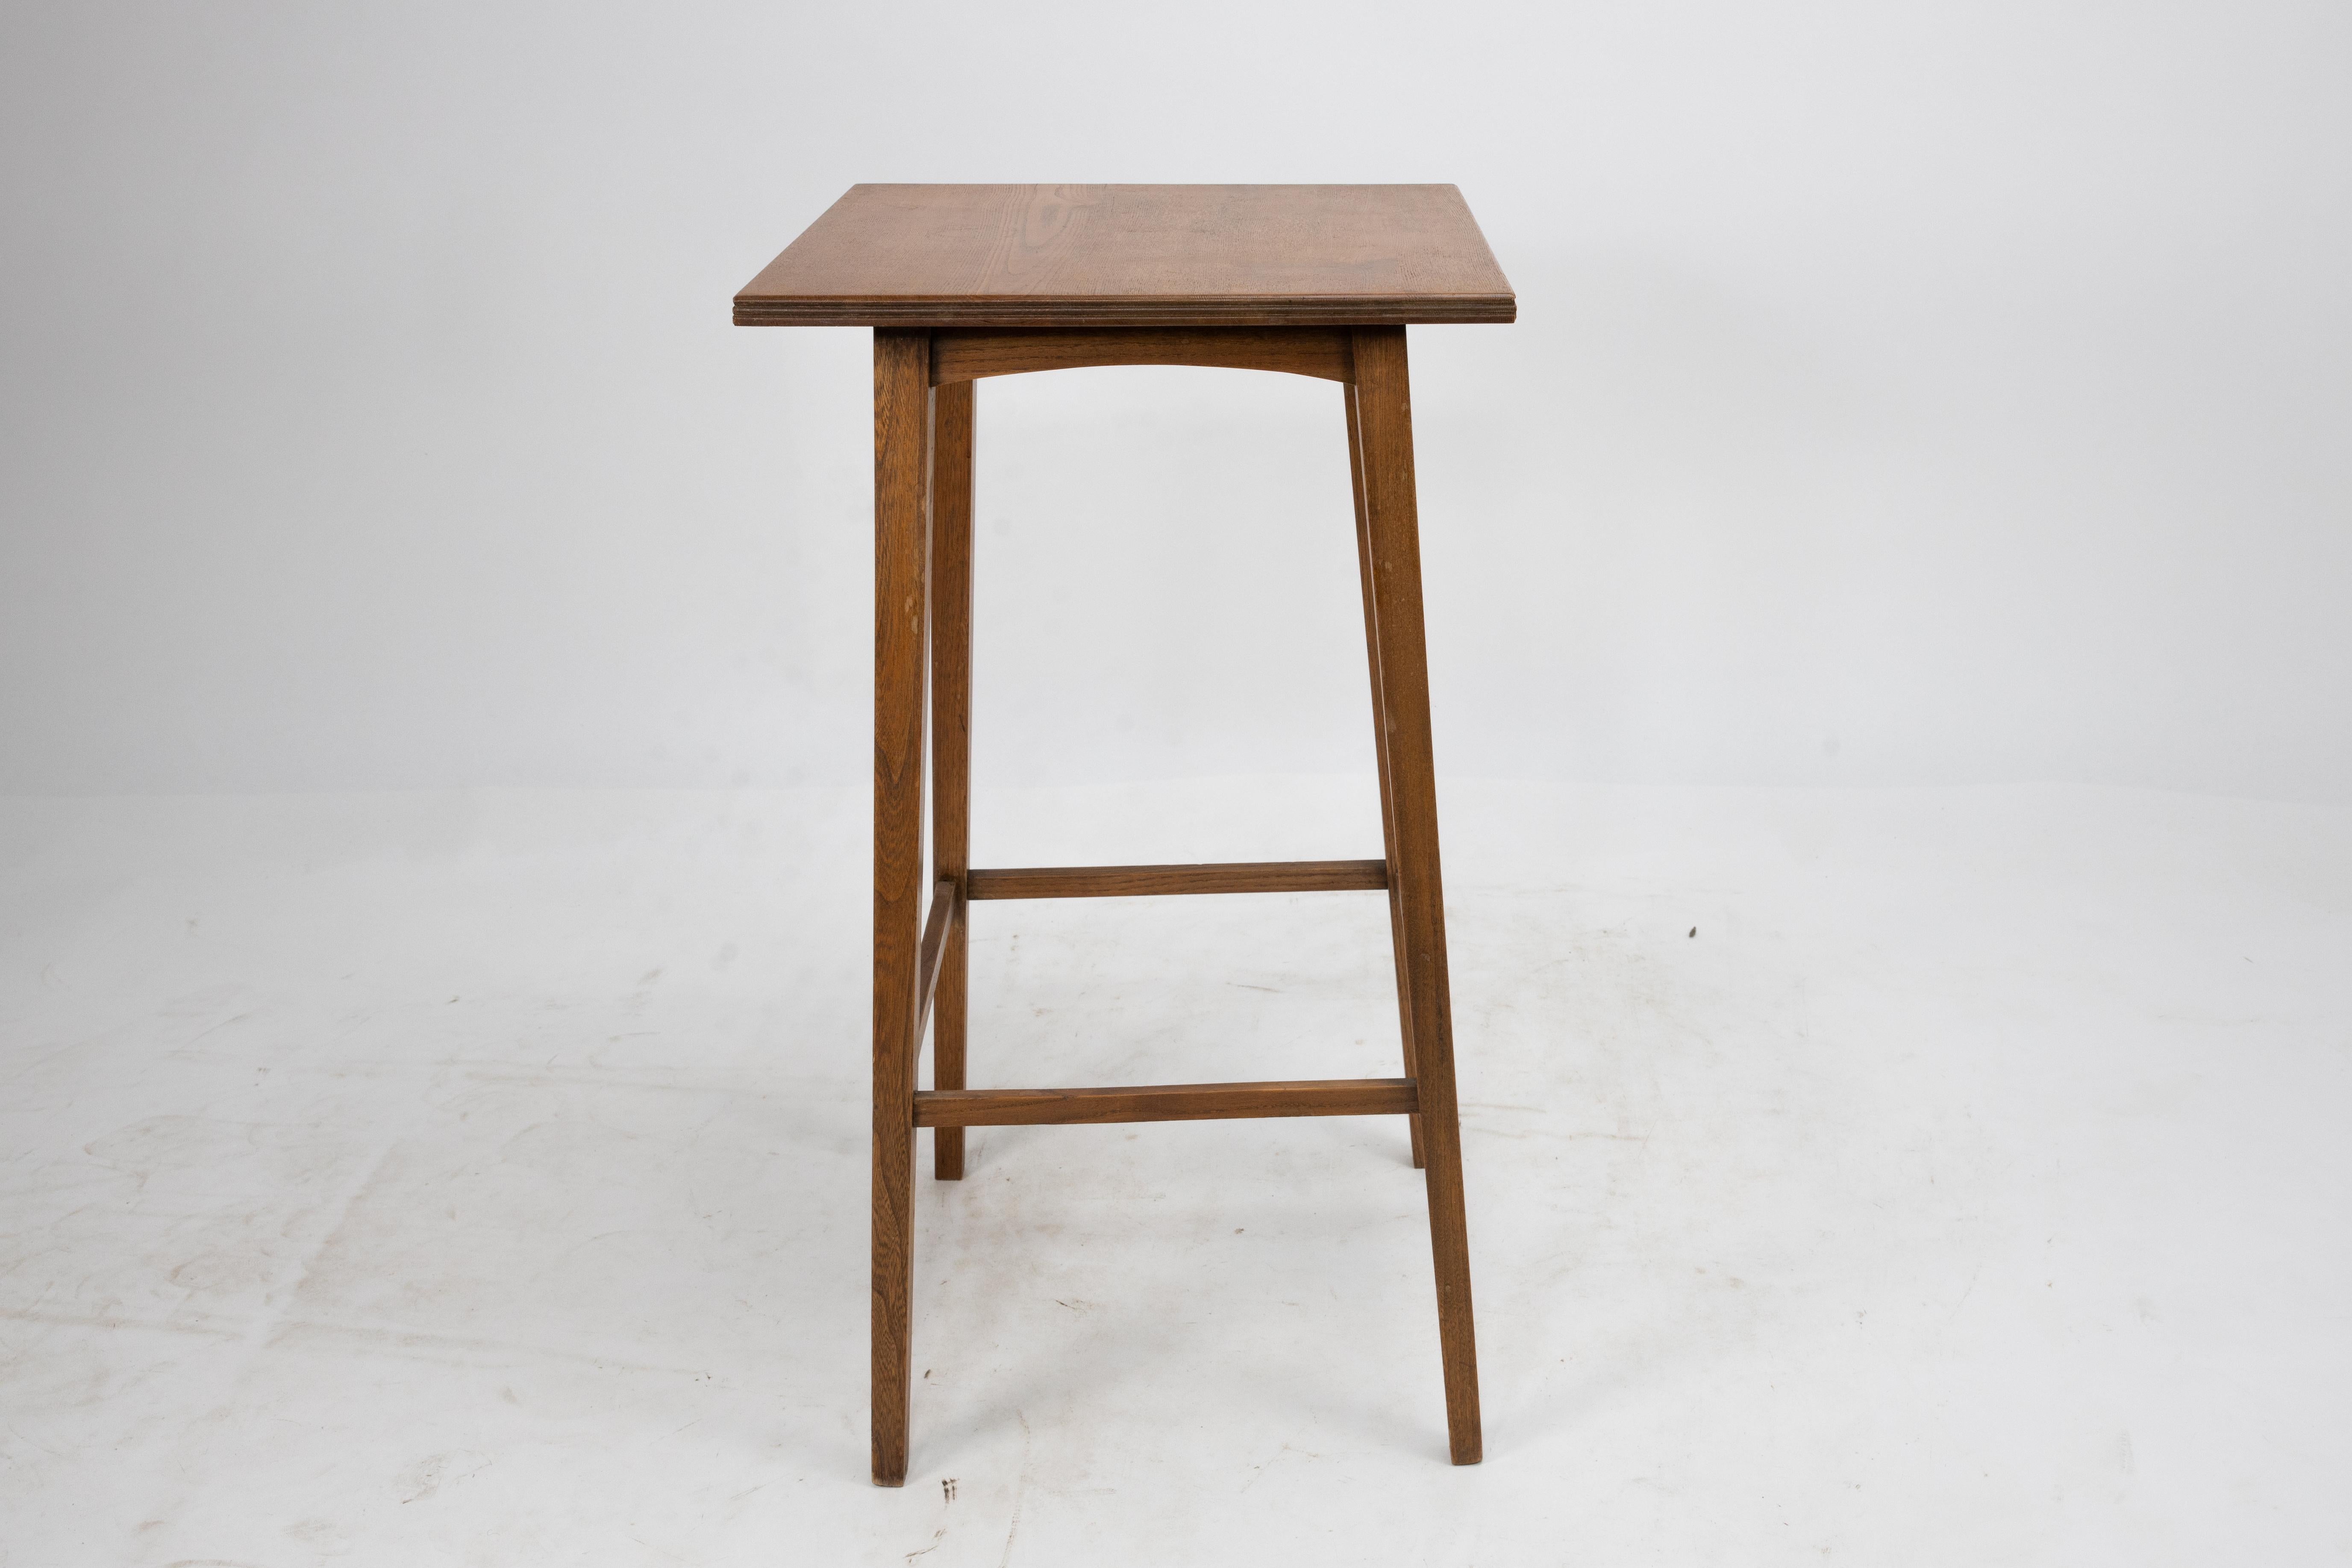 Early 20th Century Shapland & Petter A small Arts & Crafts Ash side table with square tapering legs For Sale